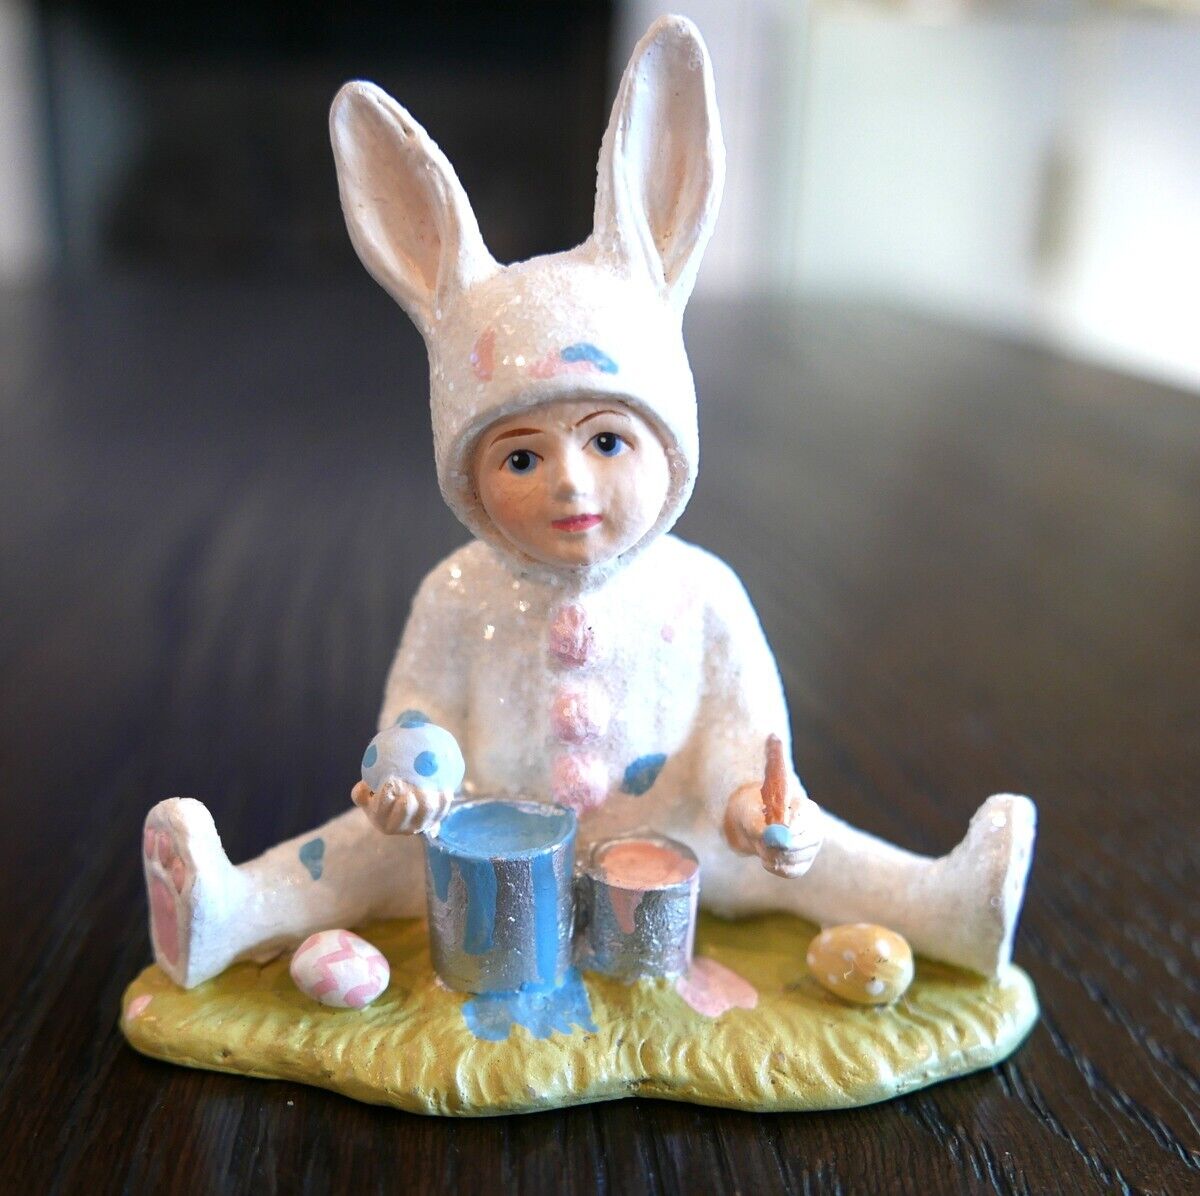 Adorable Bethany Lowe Egg Painting Sammy Easter Boy In Glitter Bunny Costume